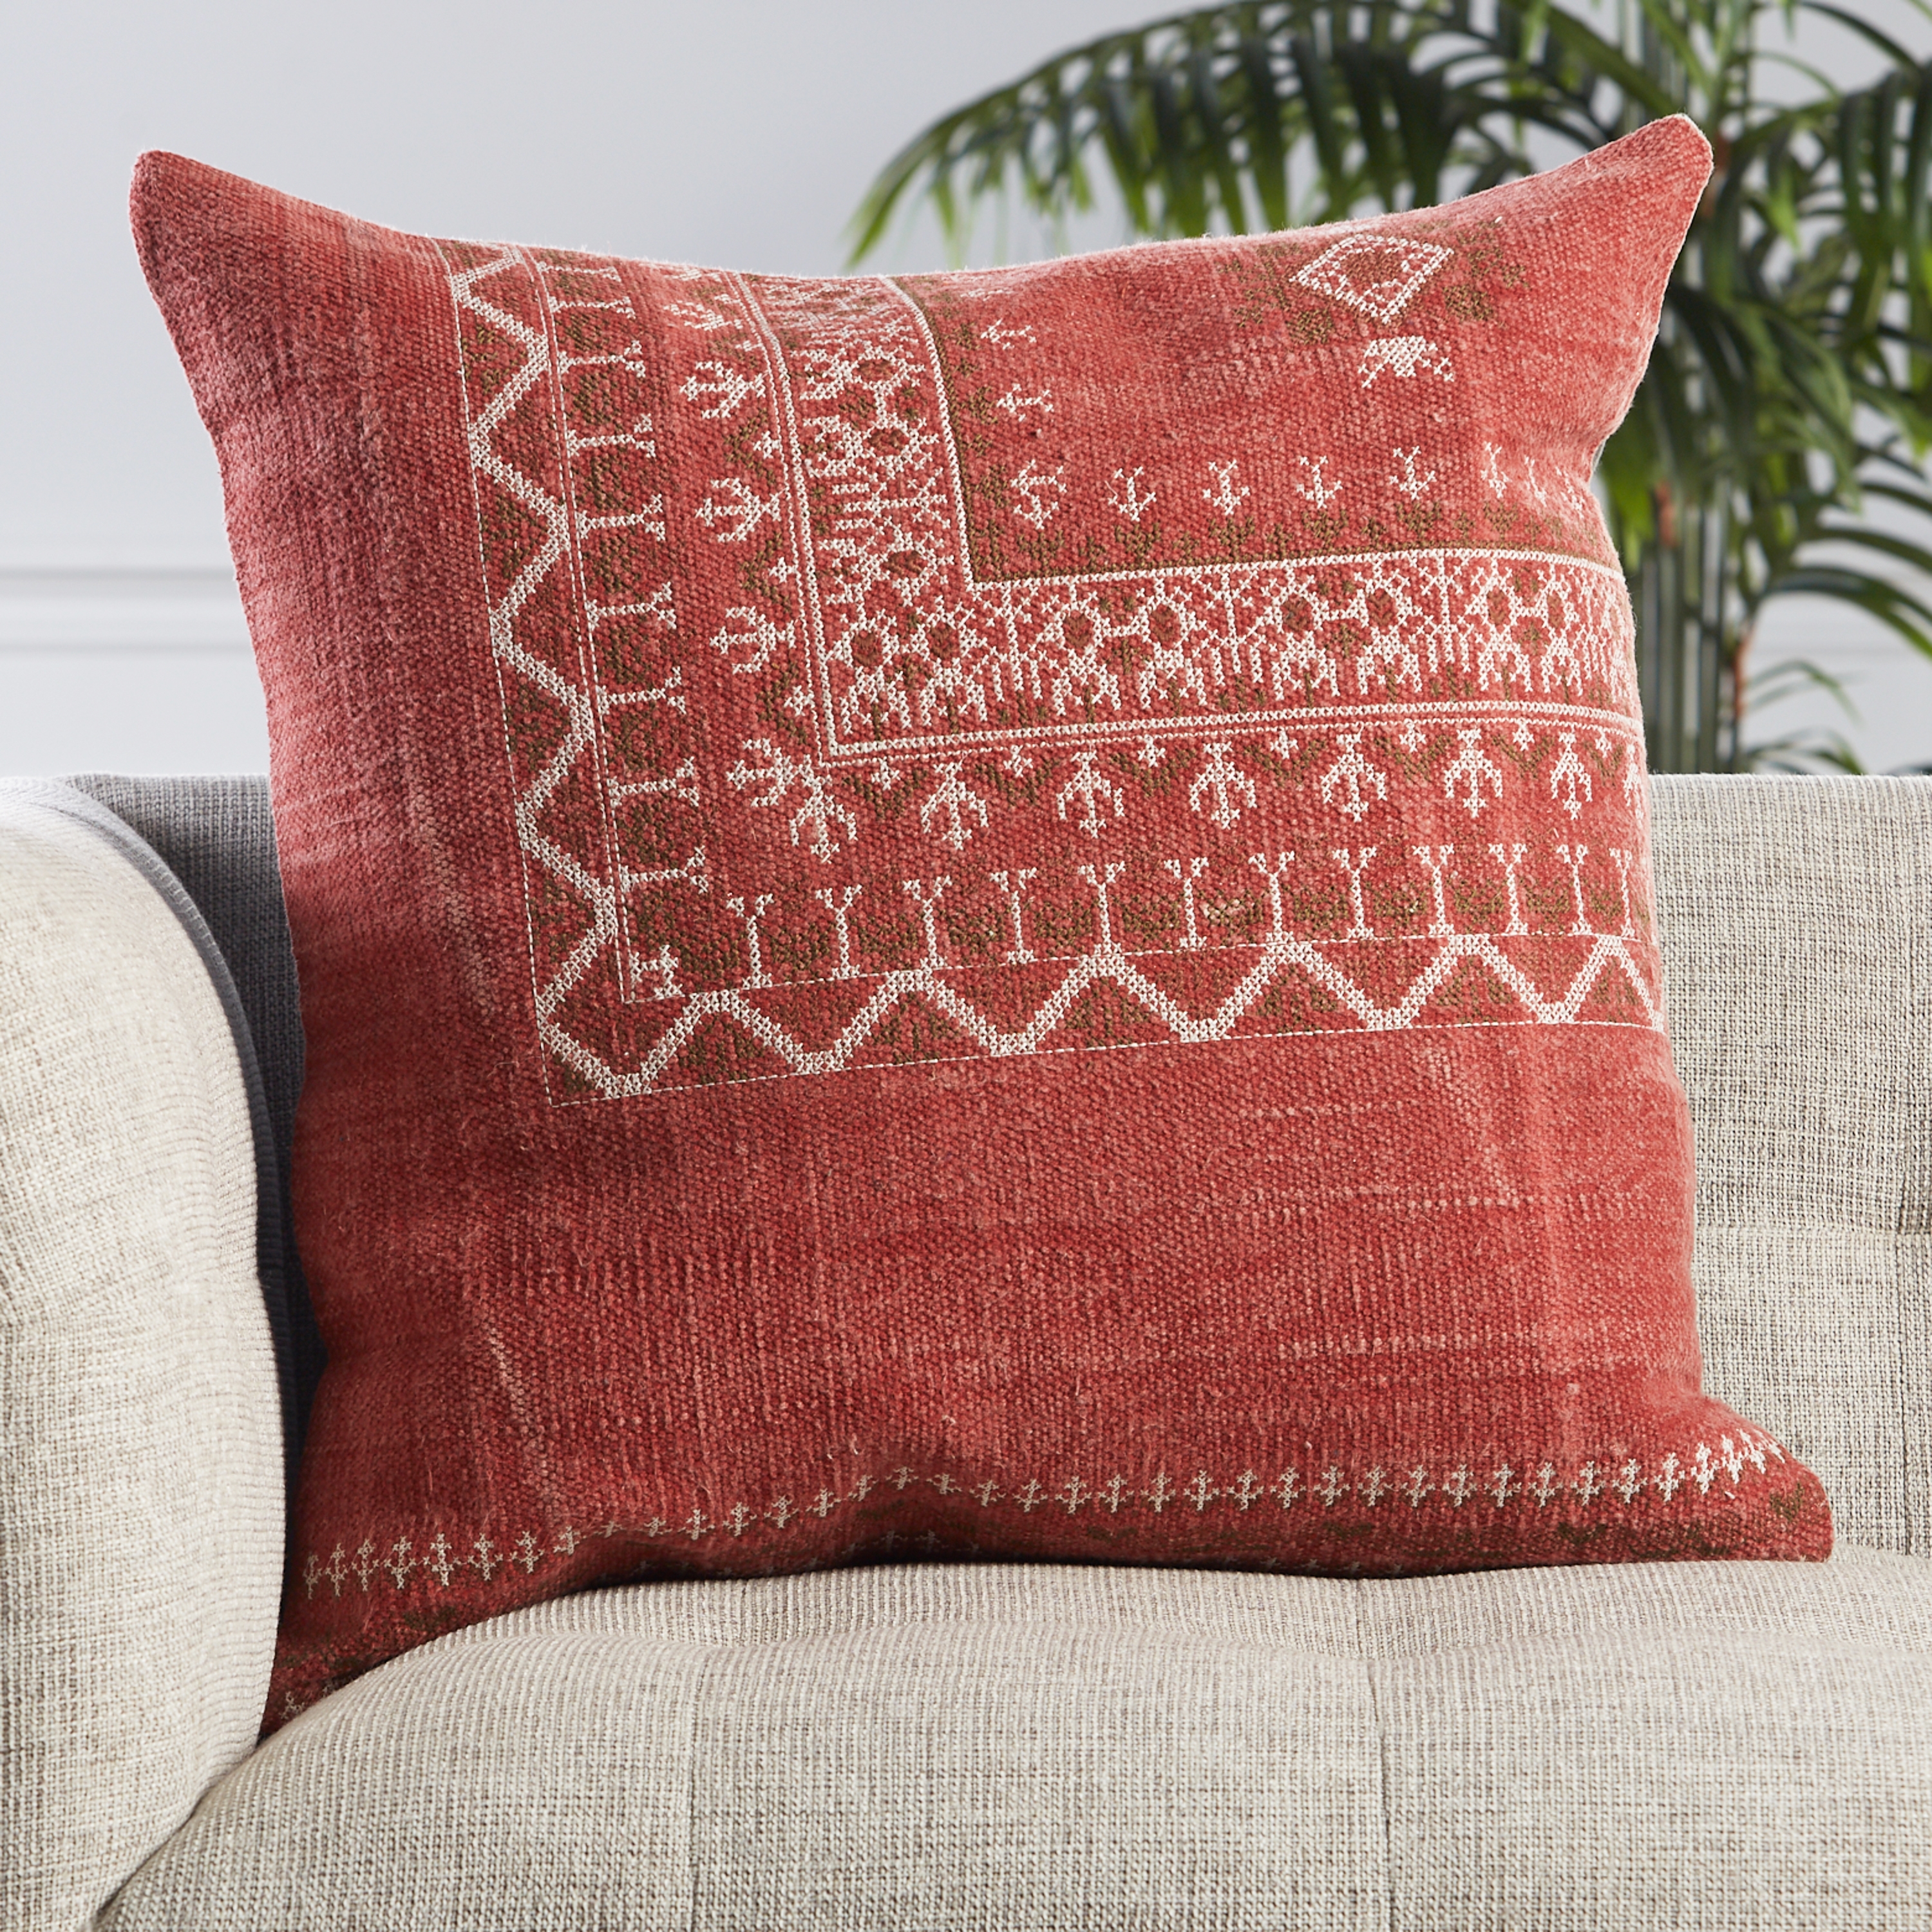 Design (US) Red 24"X24" Pillow - Image 3